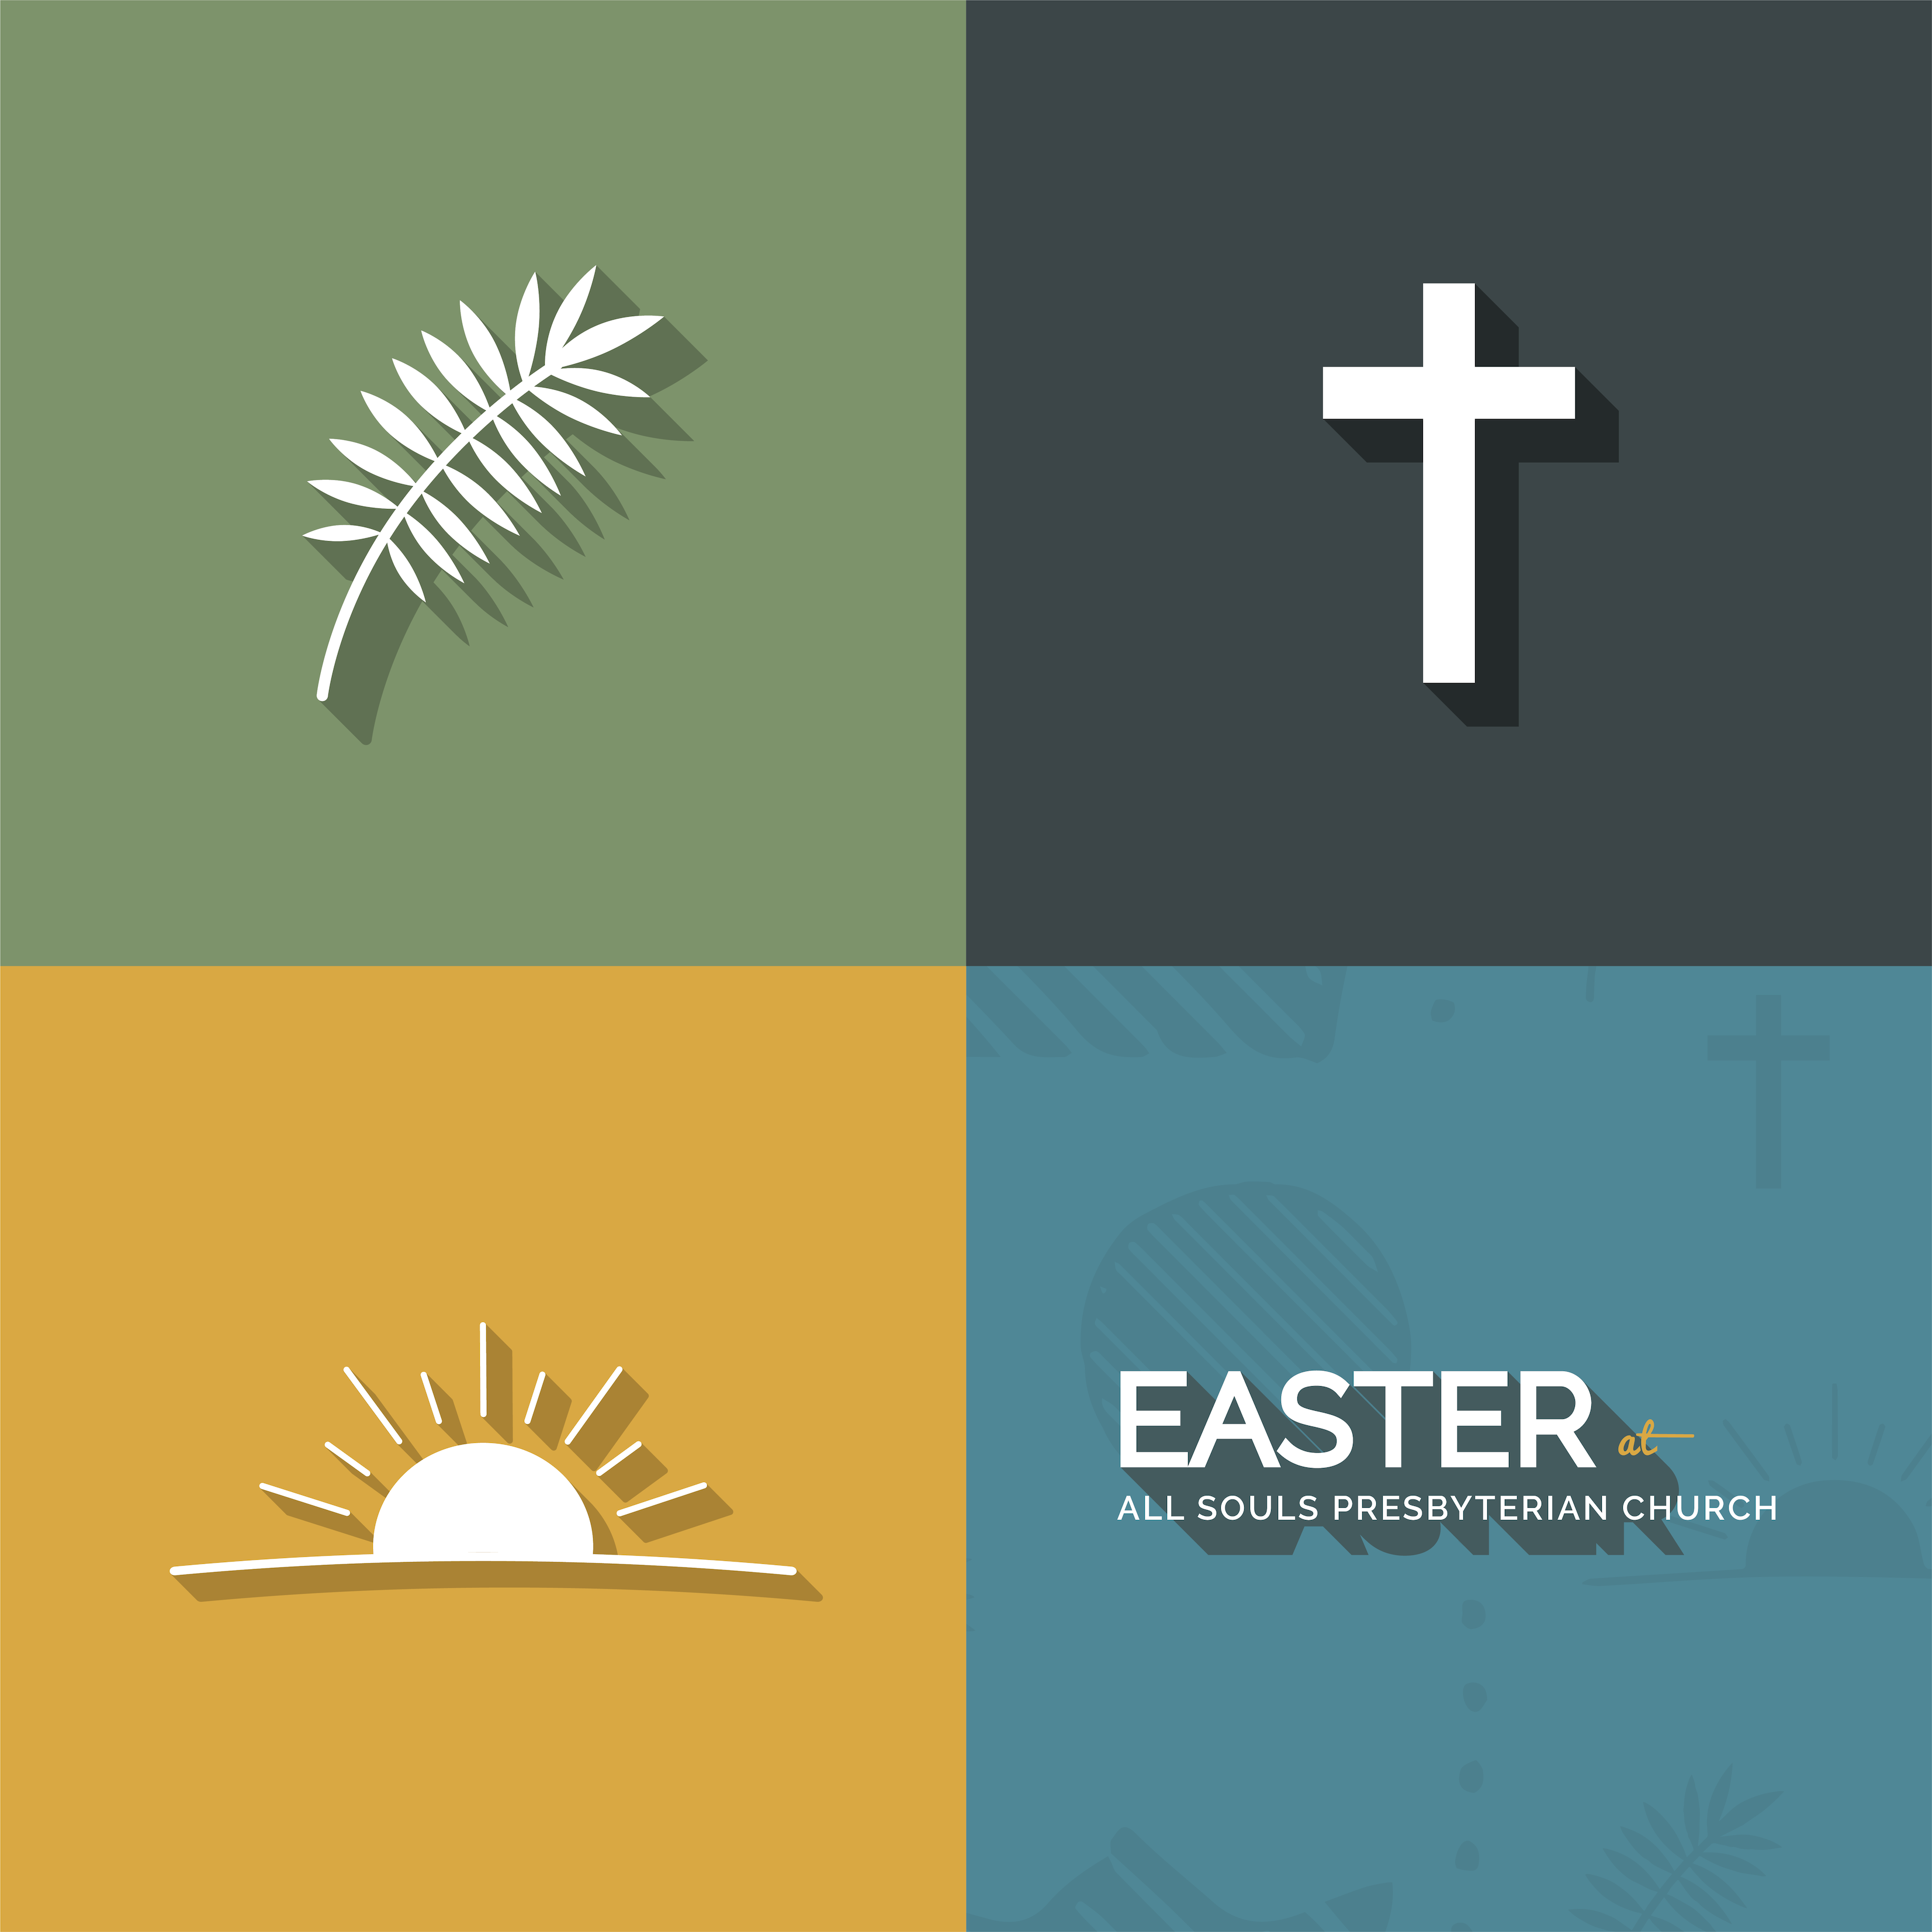 Four squares with images of a palm branch, a cross, a sunrise, and the words Easter at All Souls Presbyterian Church